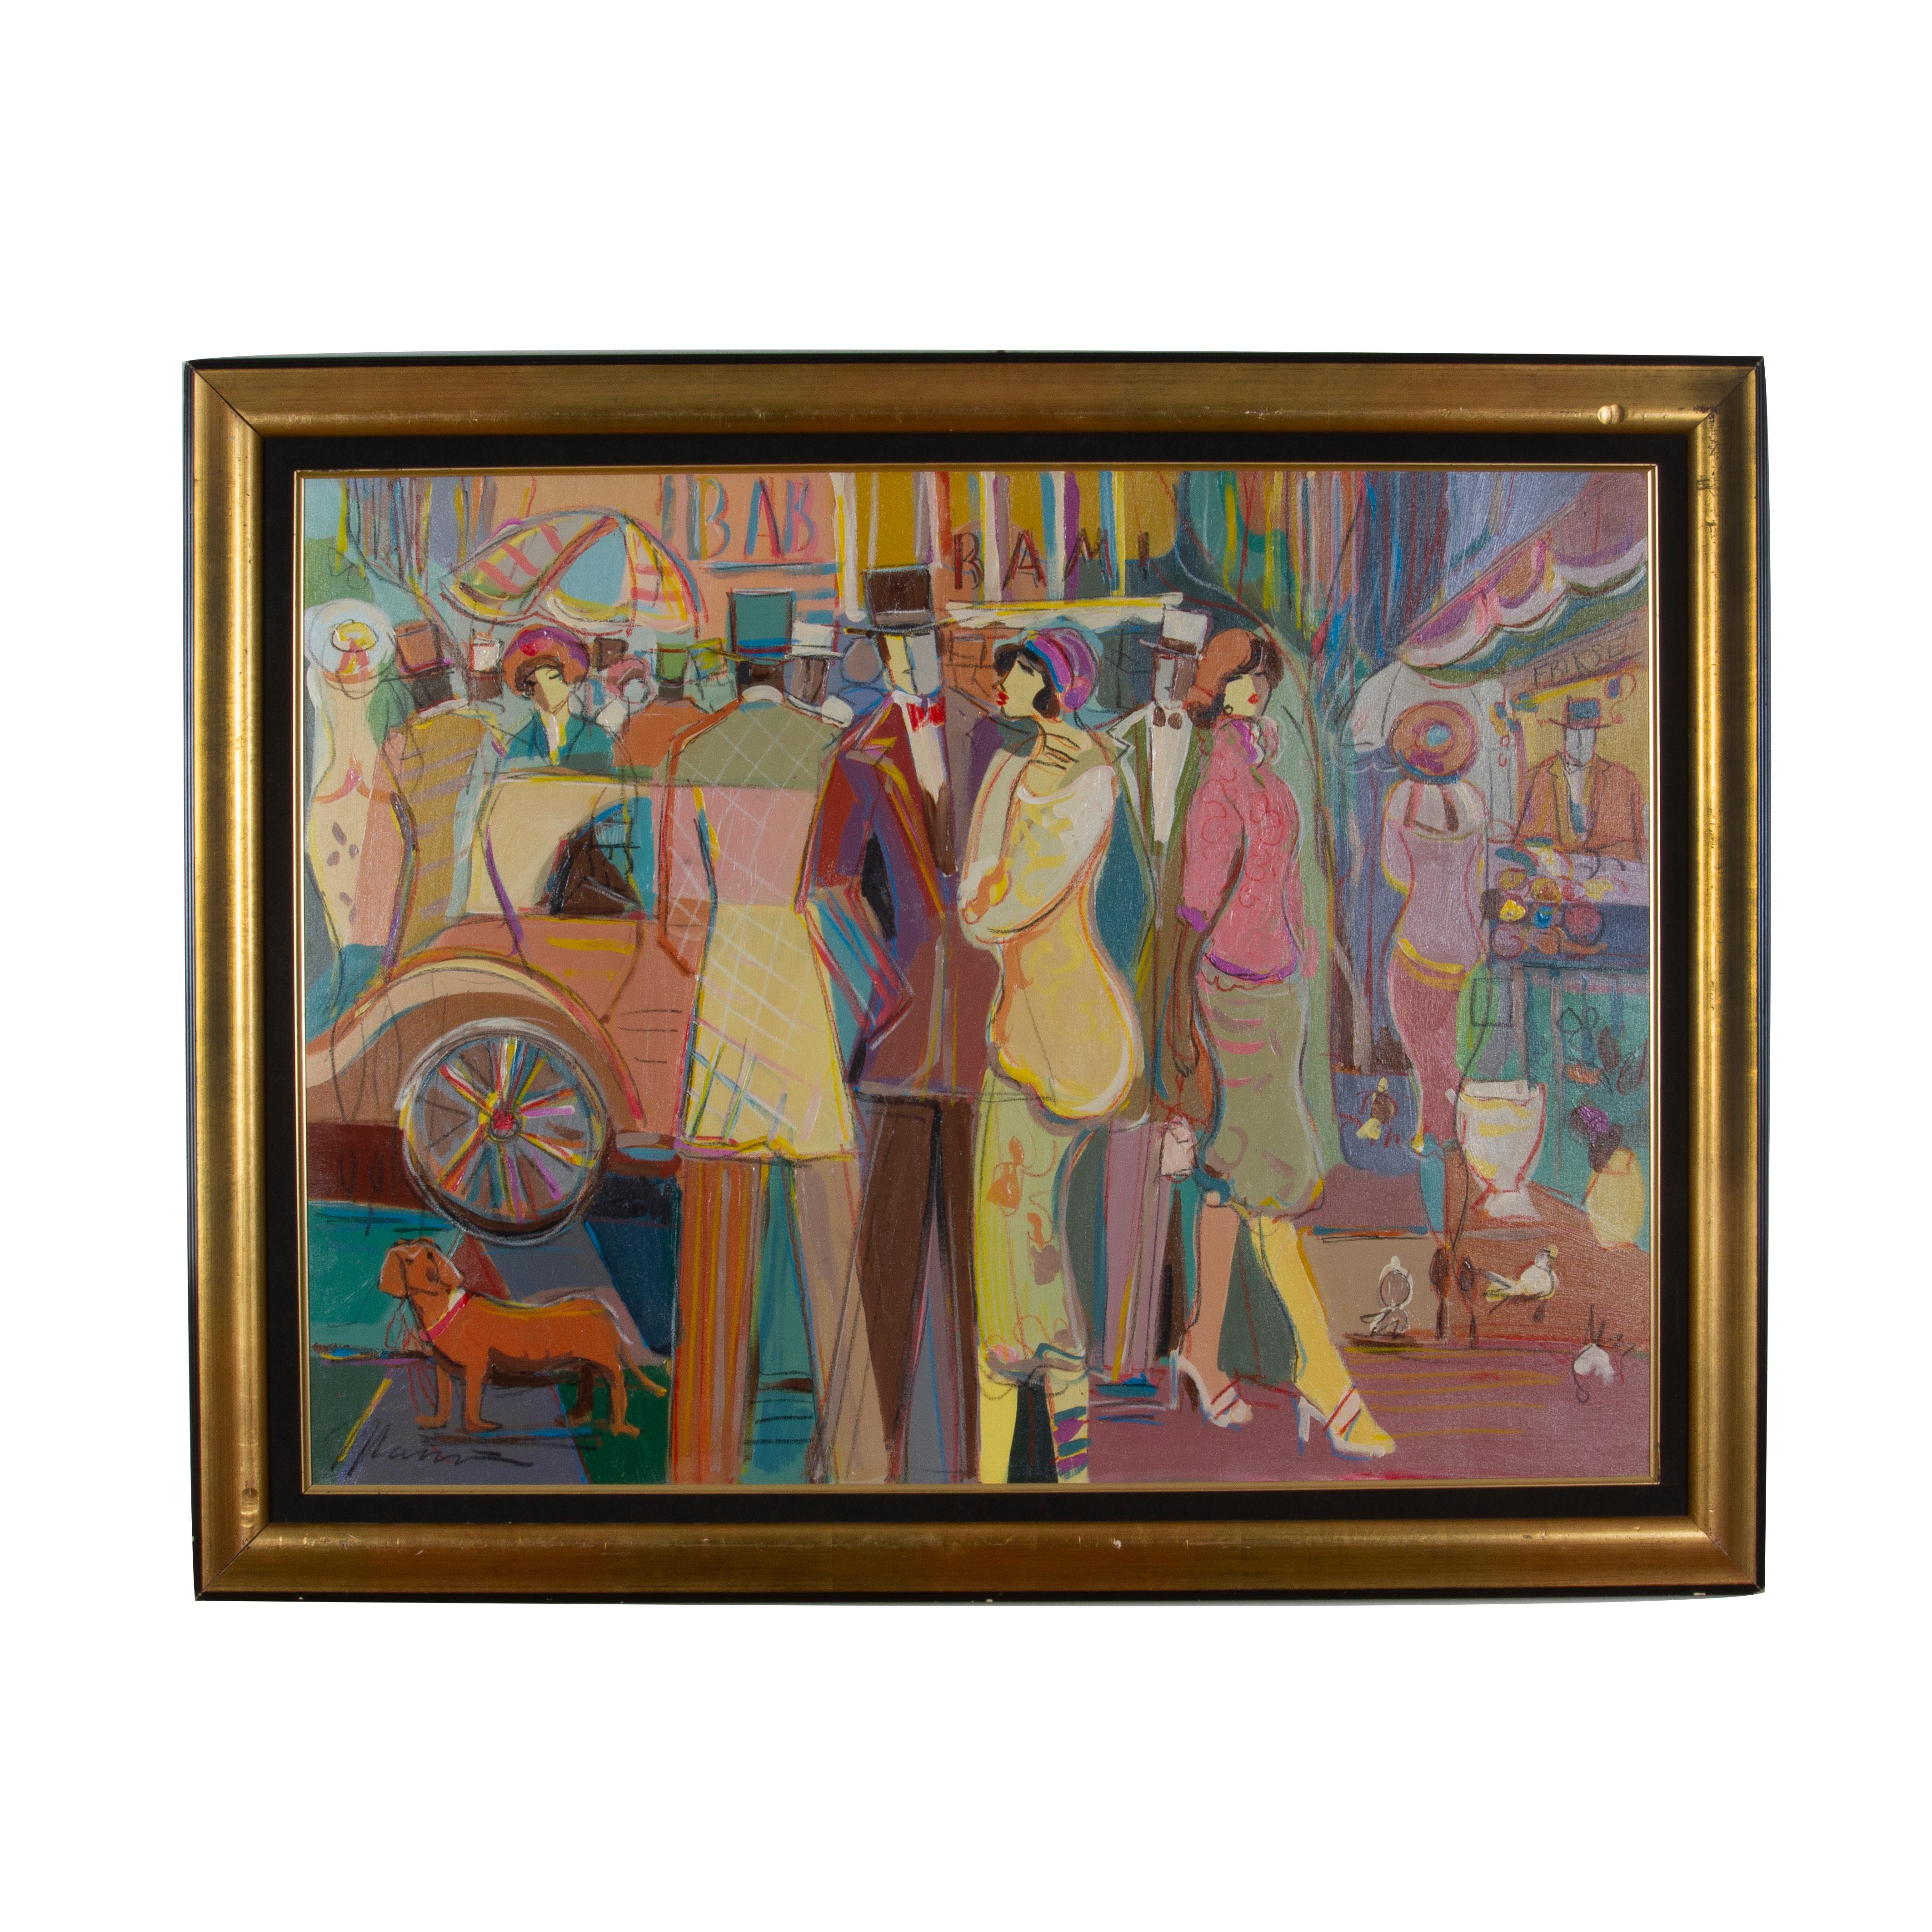 ISAAC MAIMON (b.1951)
Friske Flowers
Signed (lower left)
Oil on Canvas
Canvas: 40 X 30 inches
Frame: 47 X 37 inches
Maimon's paintings capture the "boulevard culture," that uniquely French atmosphere that so intrigued Lautrec, Bonnard and other